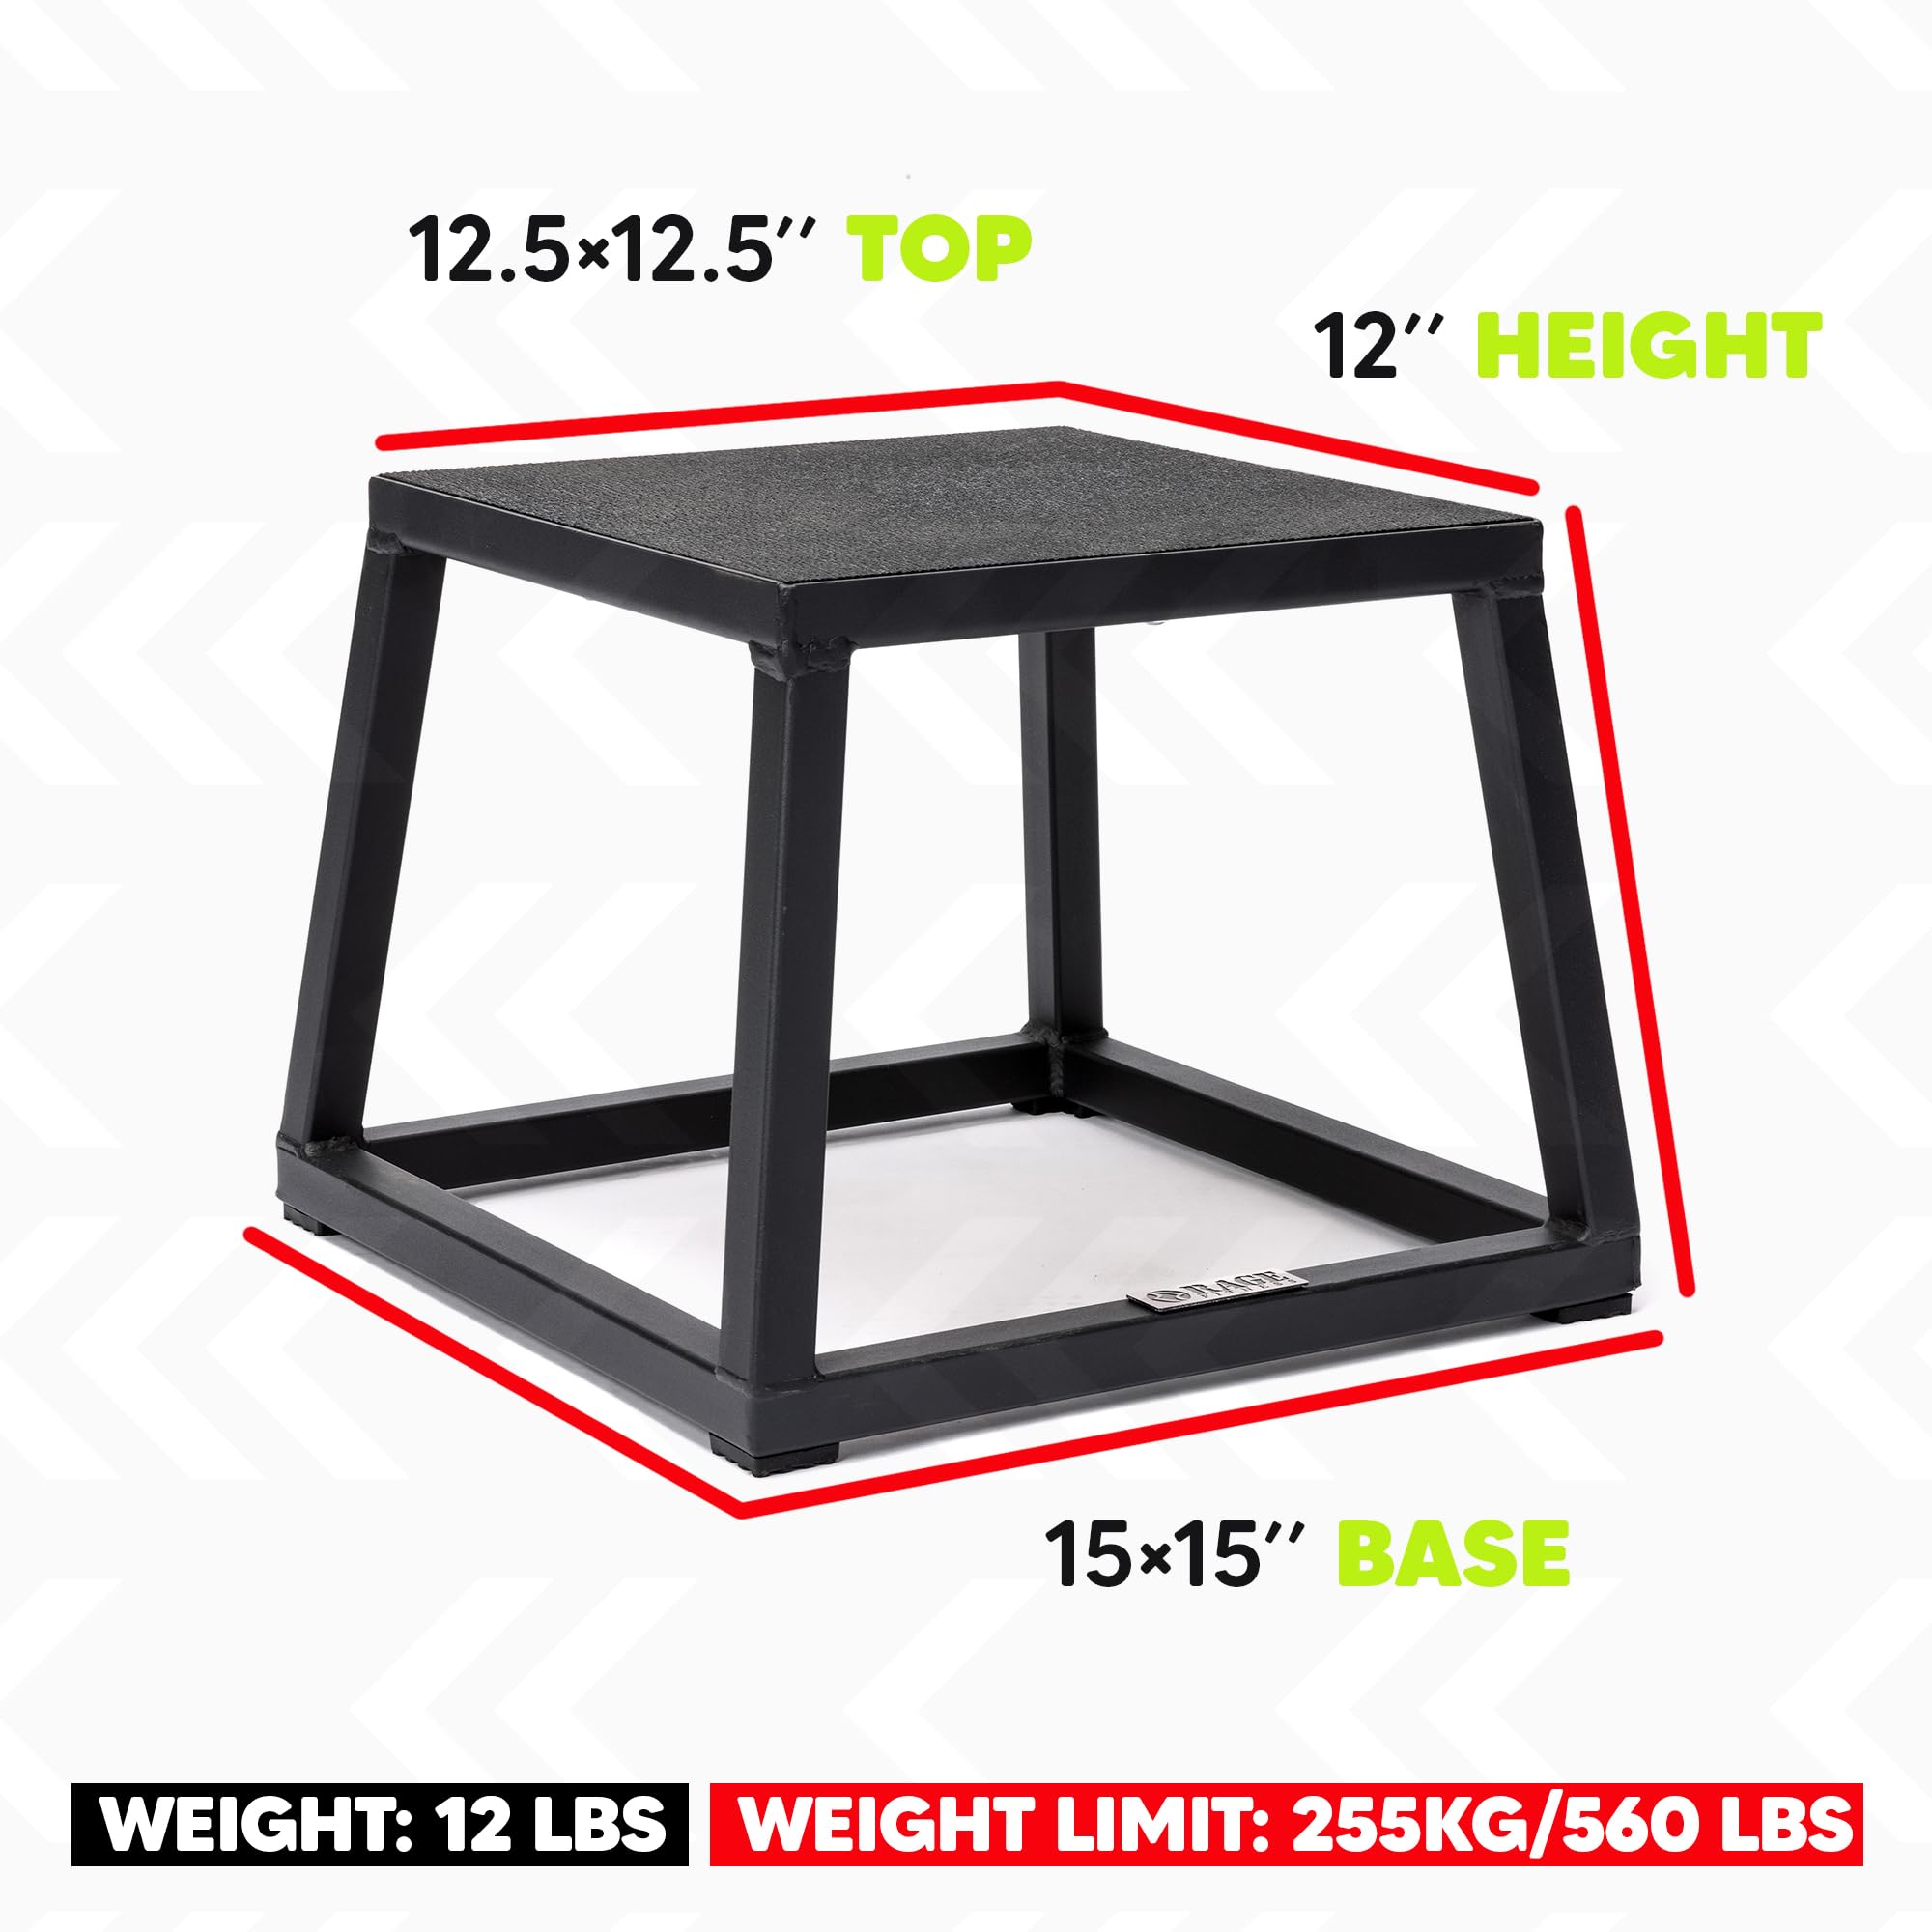 Rage Fitness Steel PlyoBox12-18-24-30Inch High Anti-SlipPlyometric JumpBoxes For Agility,Stamina And Conditioning StrengthTraining(Sold Individually)Plyometric Platform Step Up Box Jump For Home & Gym